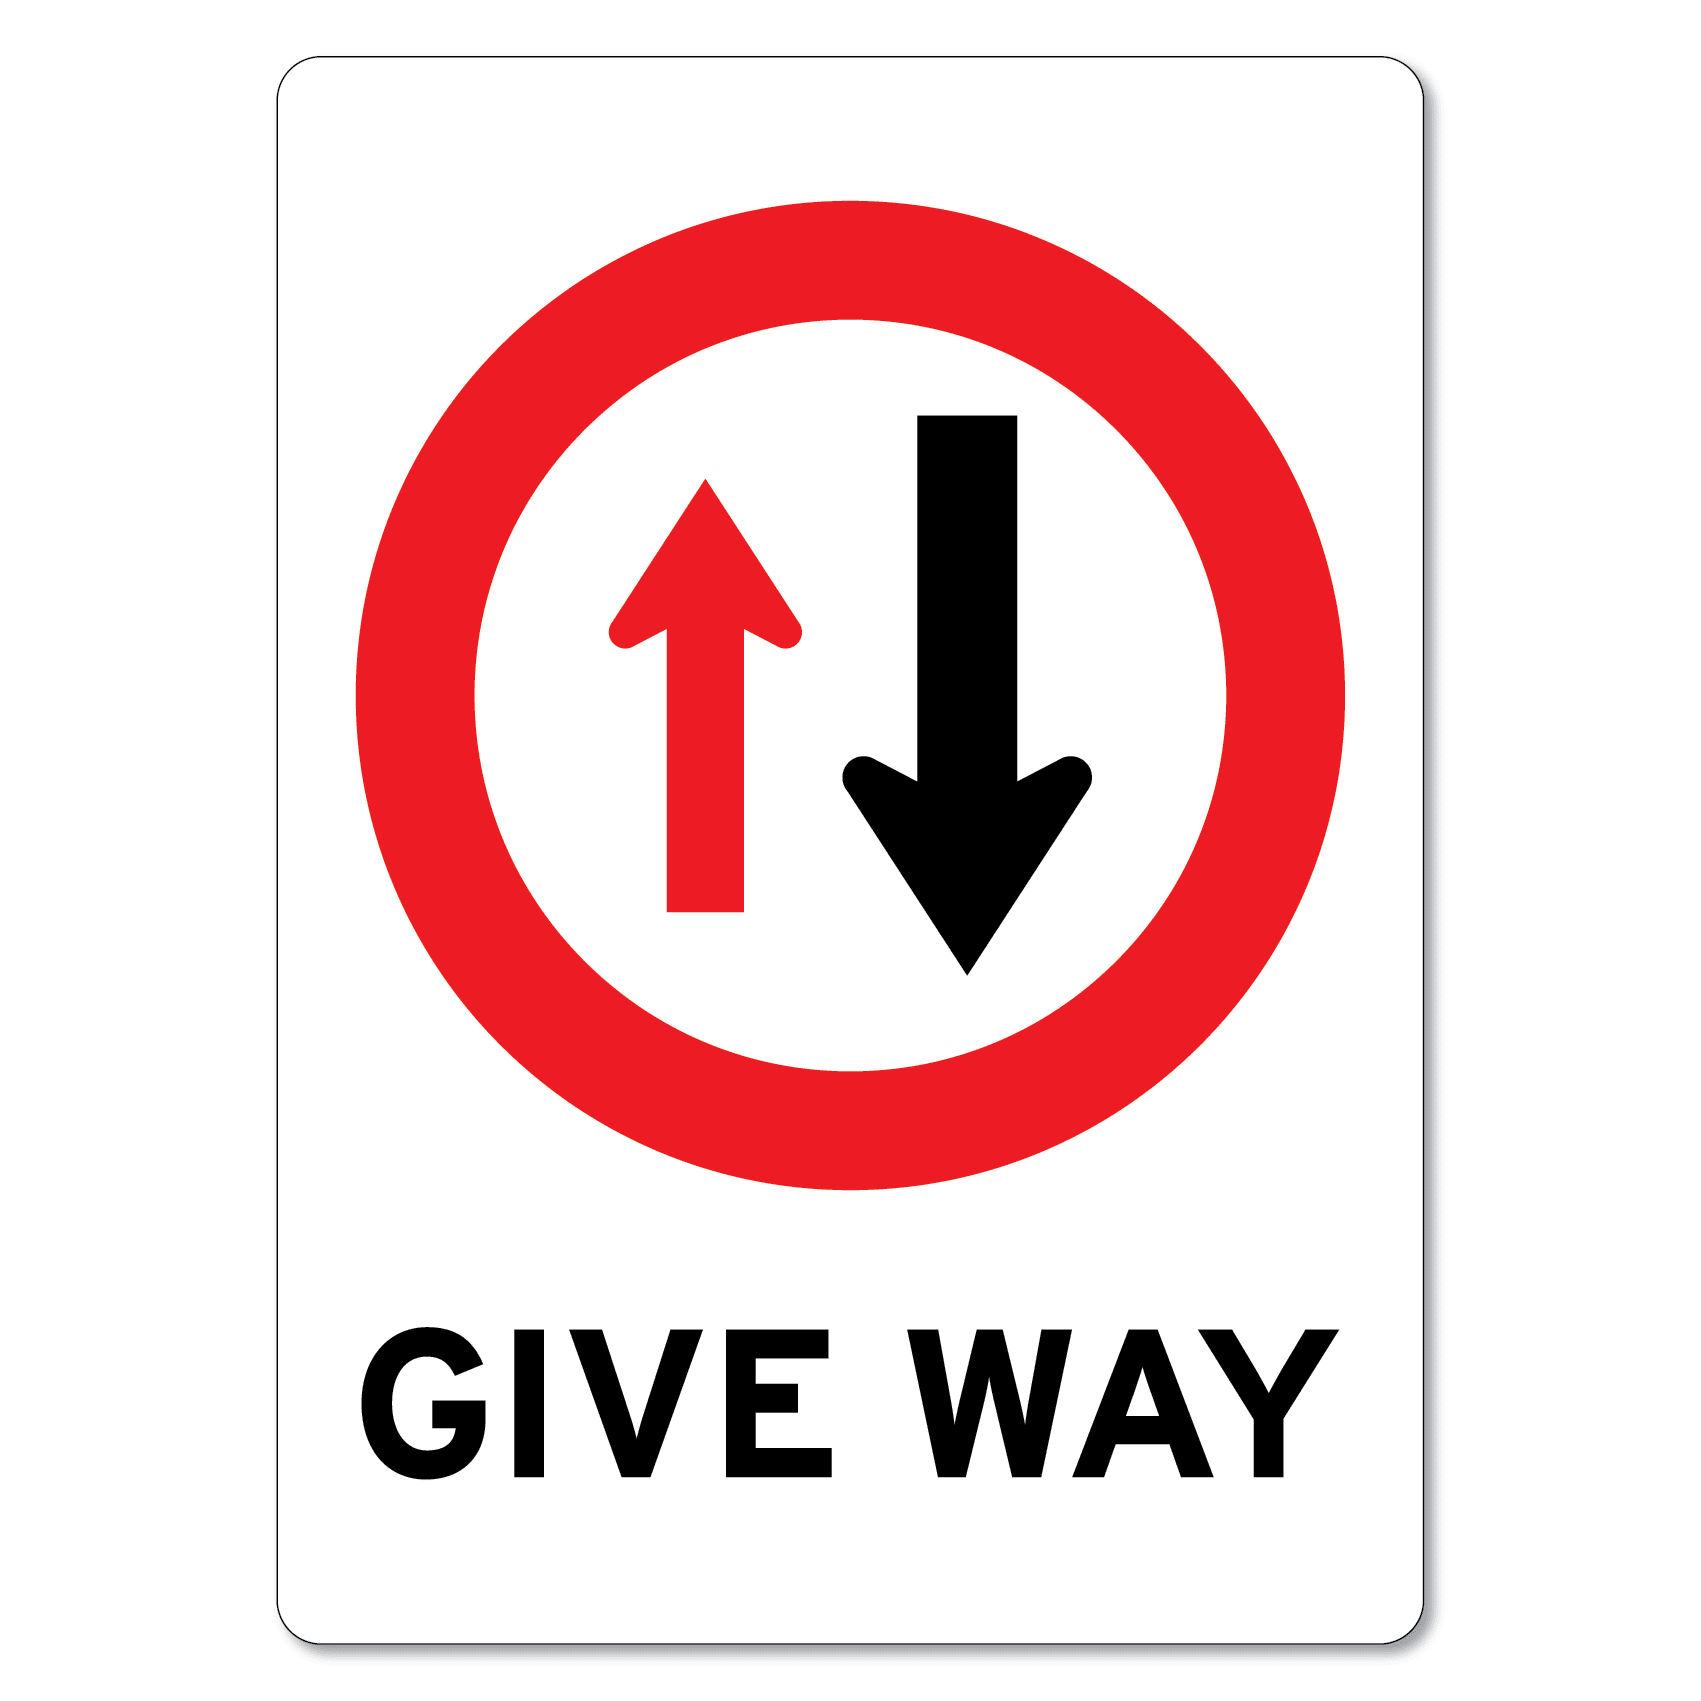 Way sign. Give way Traffic sign. Giving the way. Give me a sign. To traes give way.